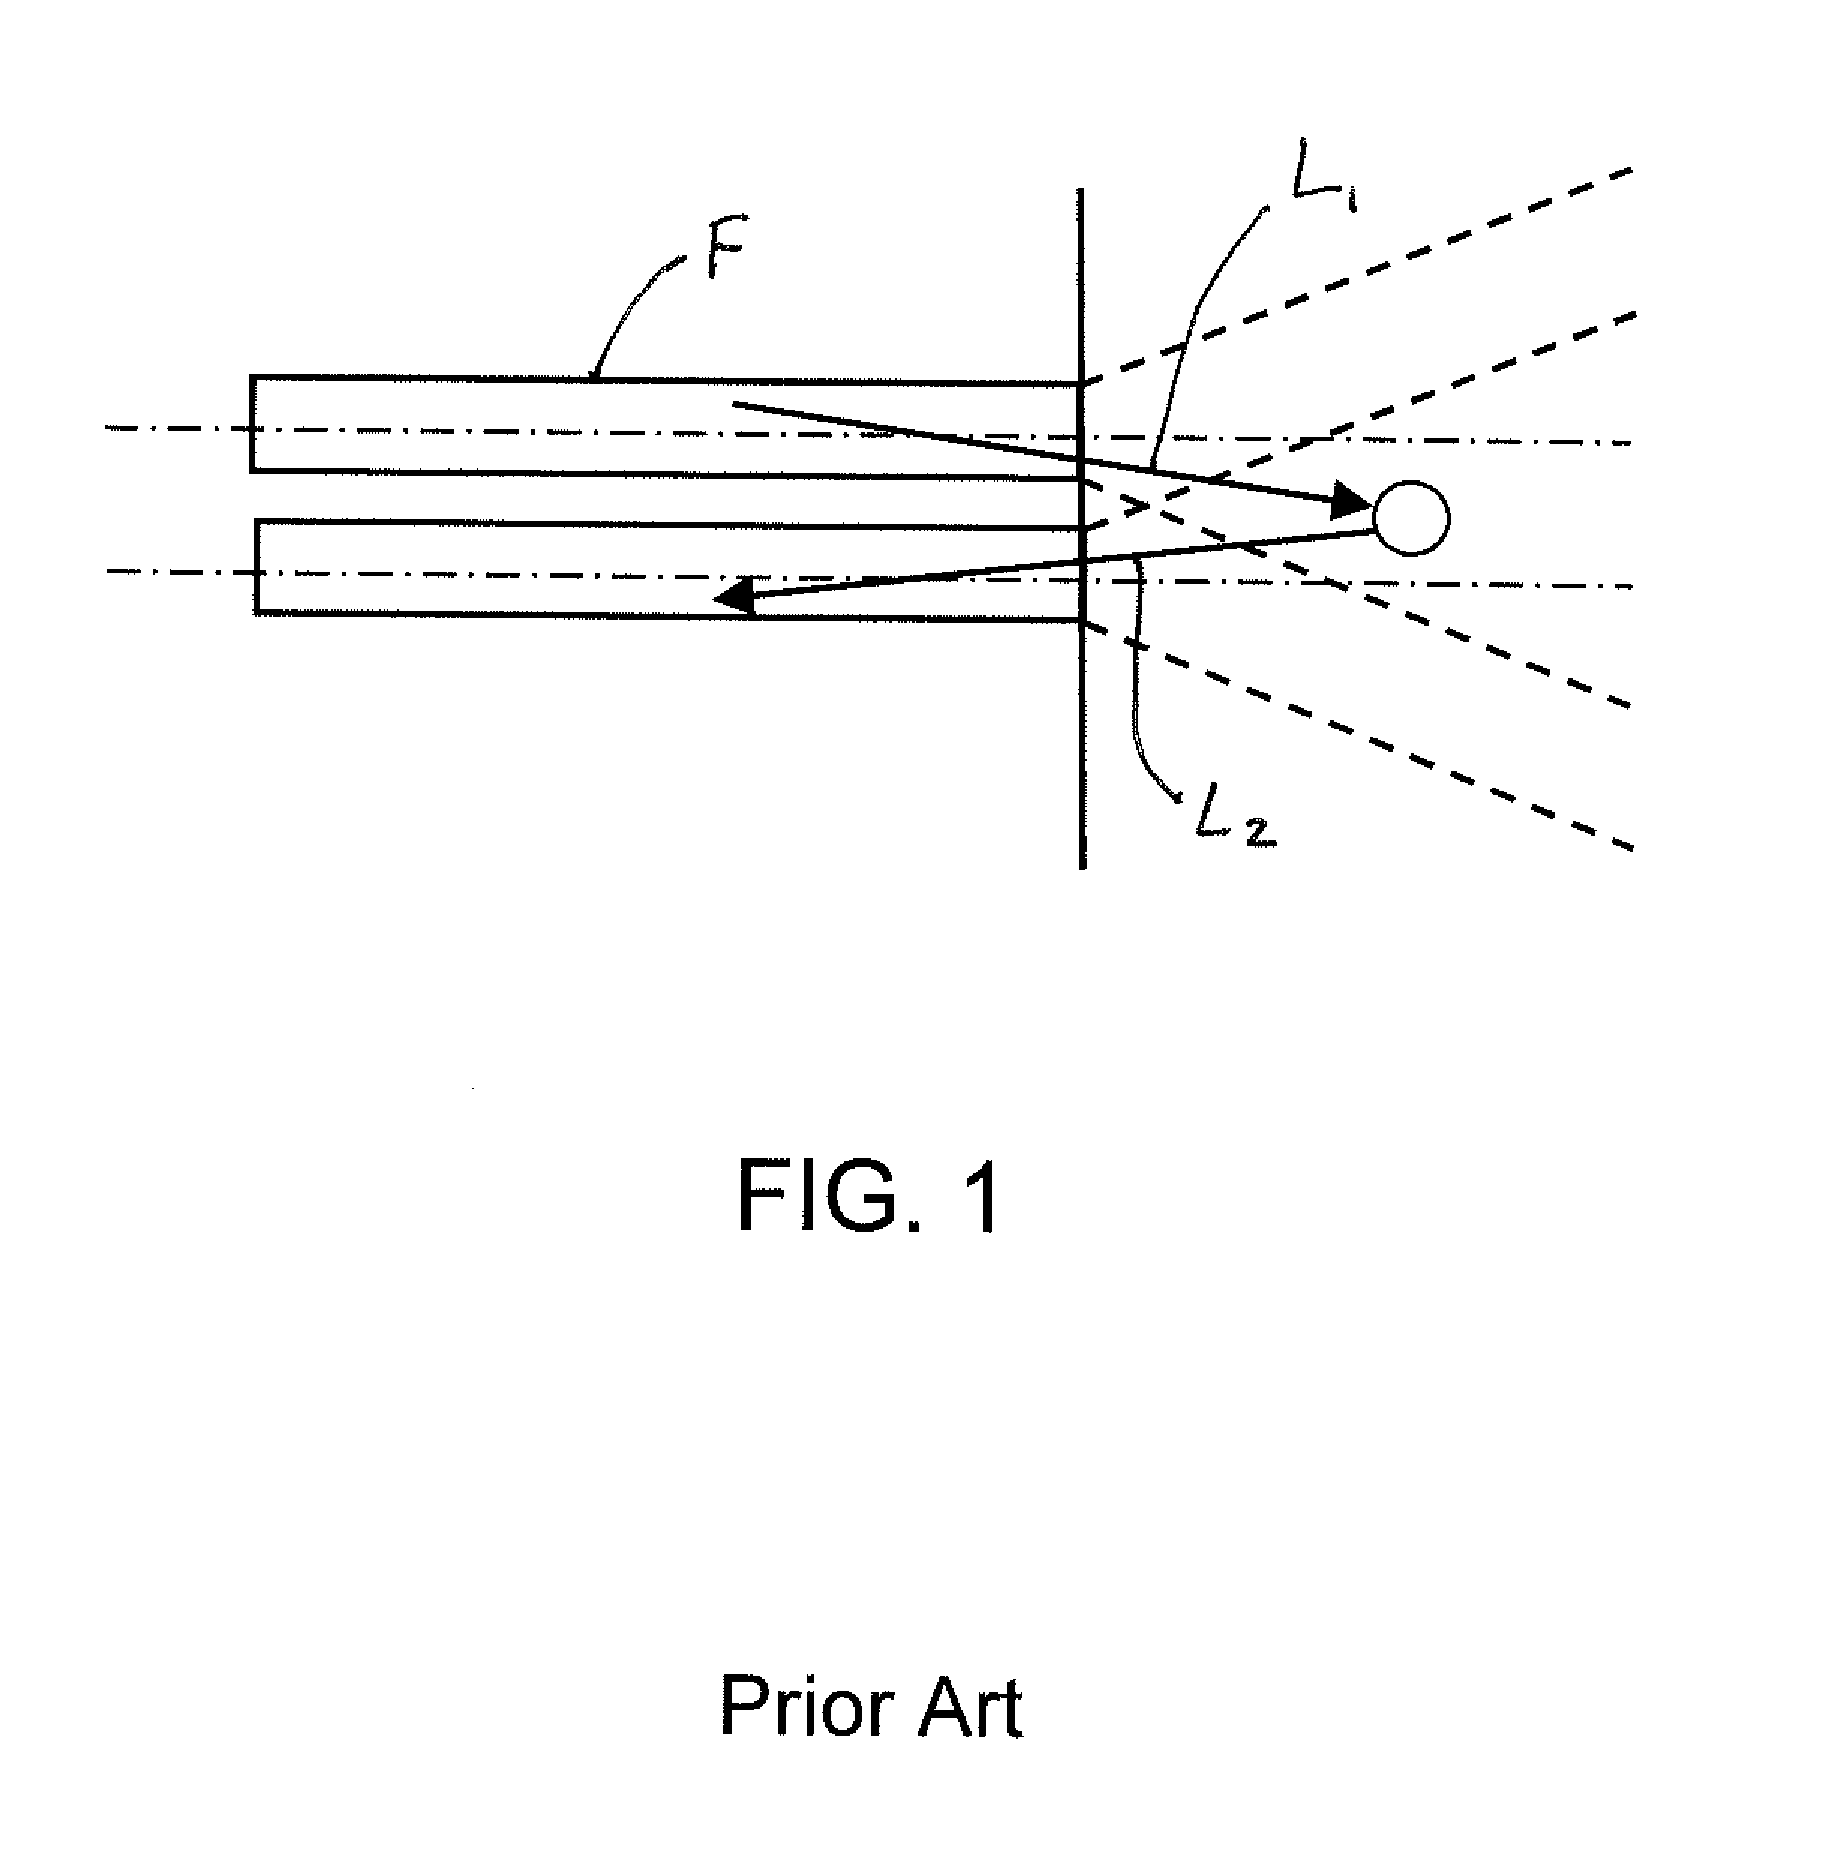 Apparatus and method for improved processing of food products